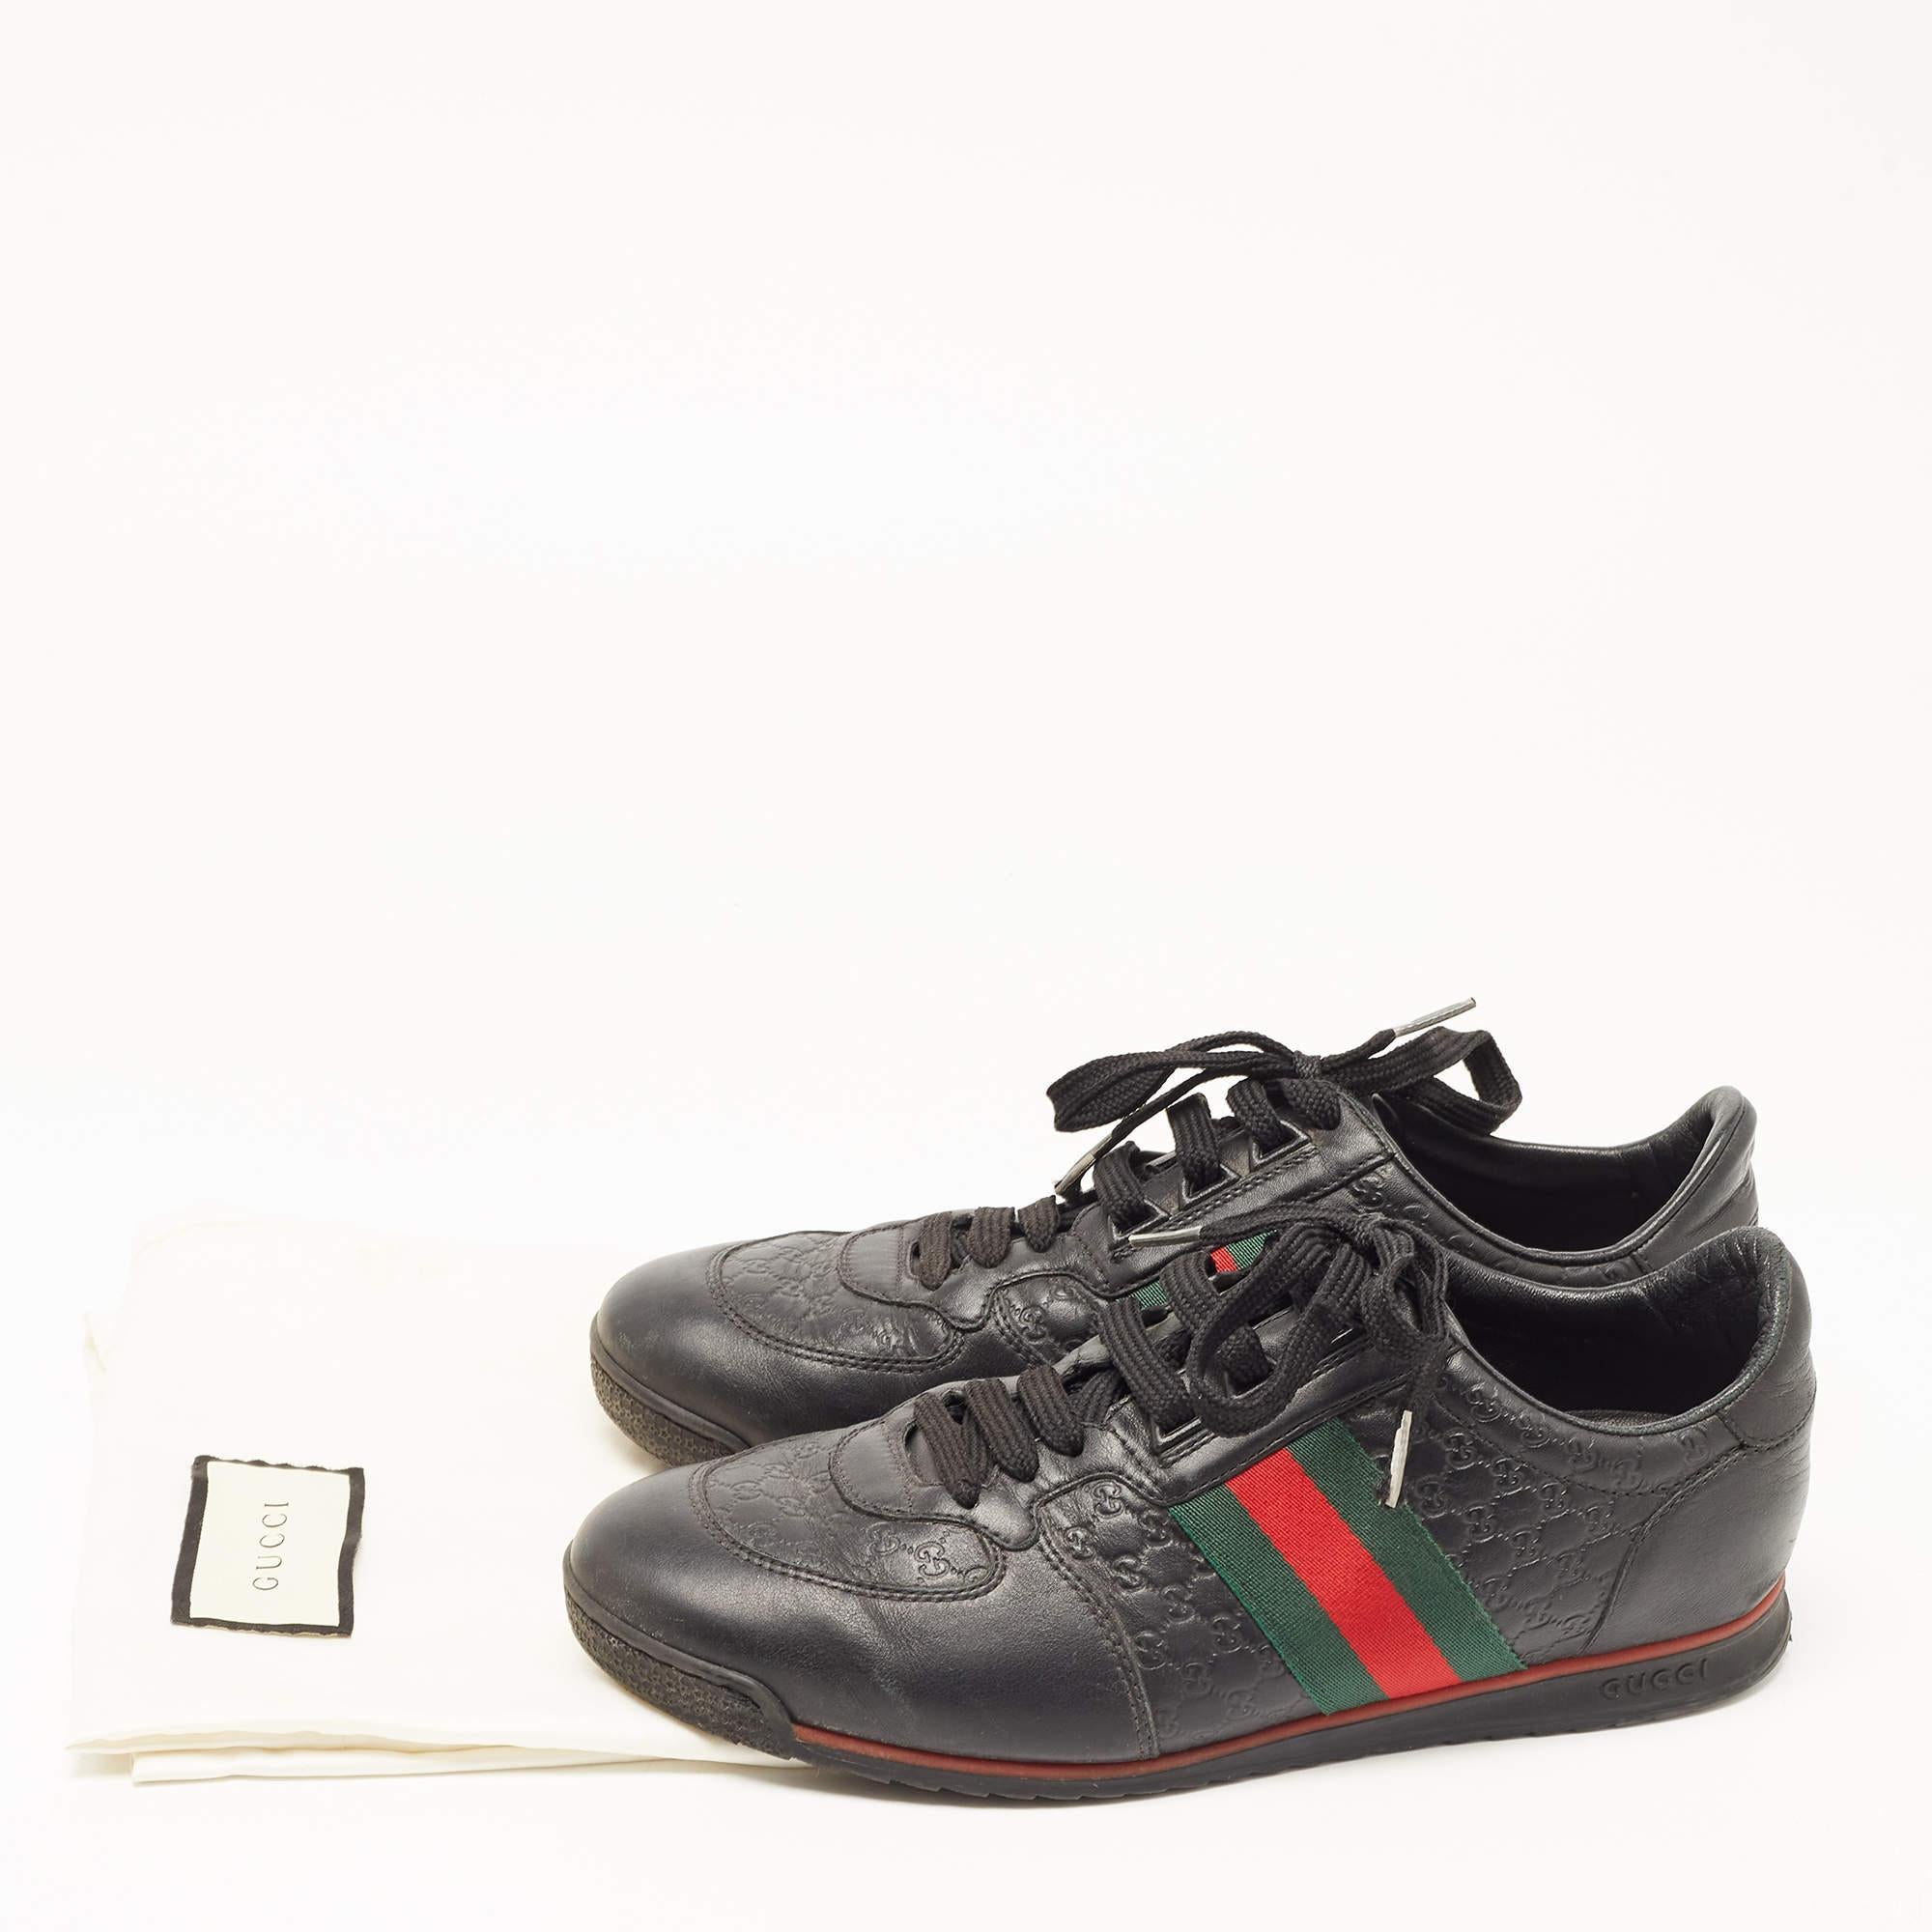 Gucci Black Microguccissima Leather Web Low Top Sneakers Size 40.5 For Sale 5